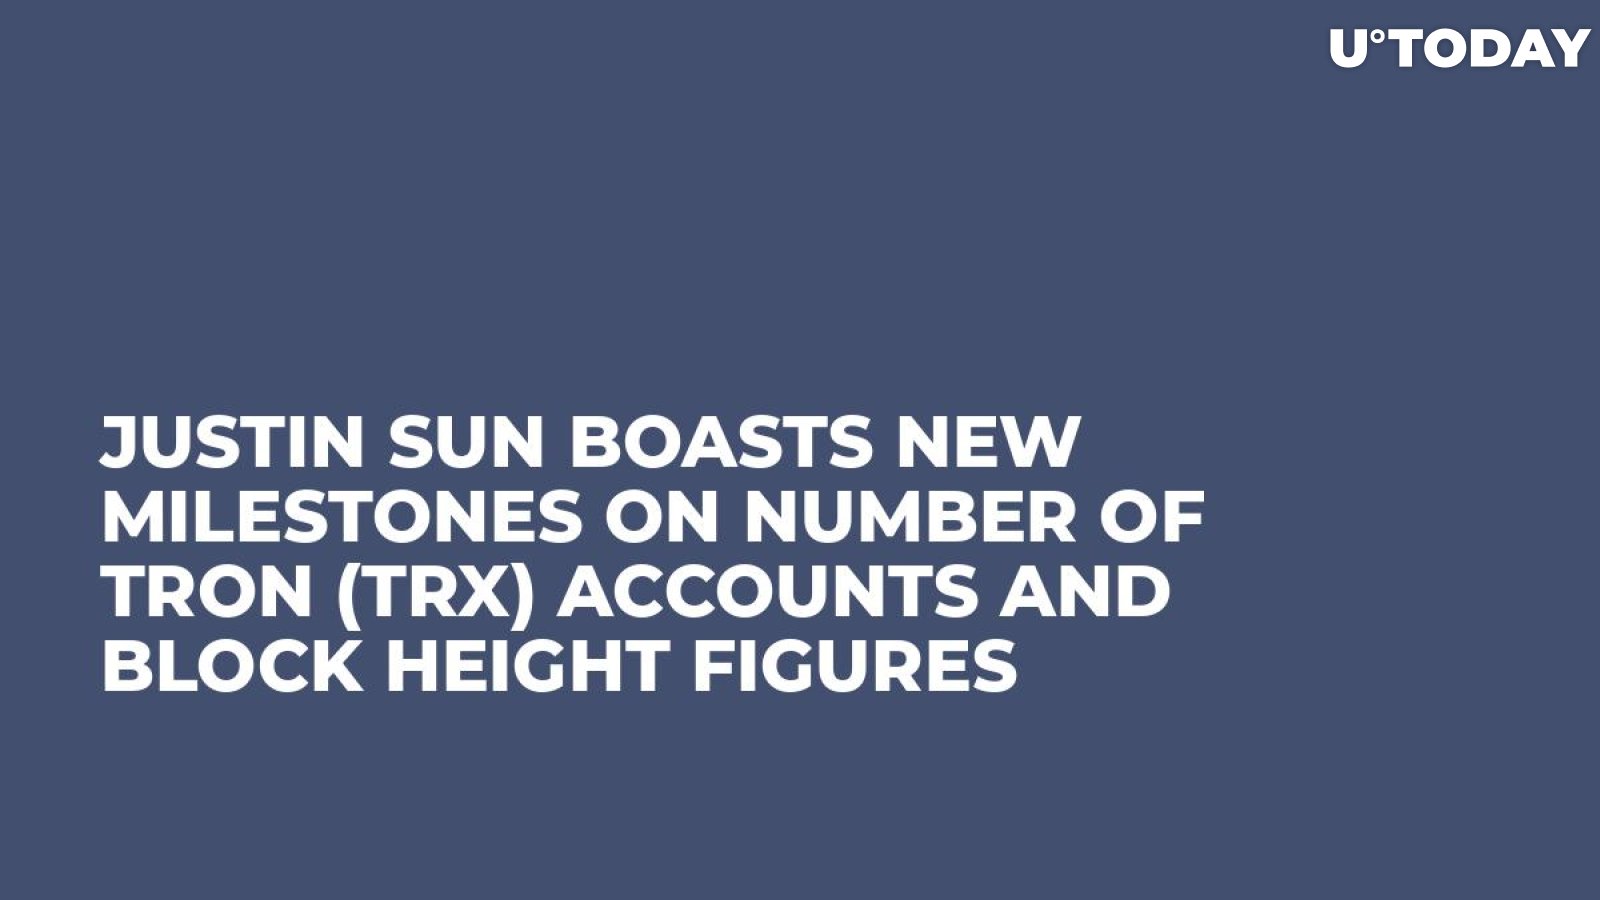 Justin Sun Boasts New Milestones on Number of Tron (TRX) Accounts and Block Height Figures